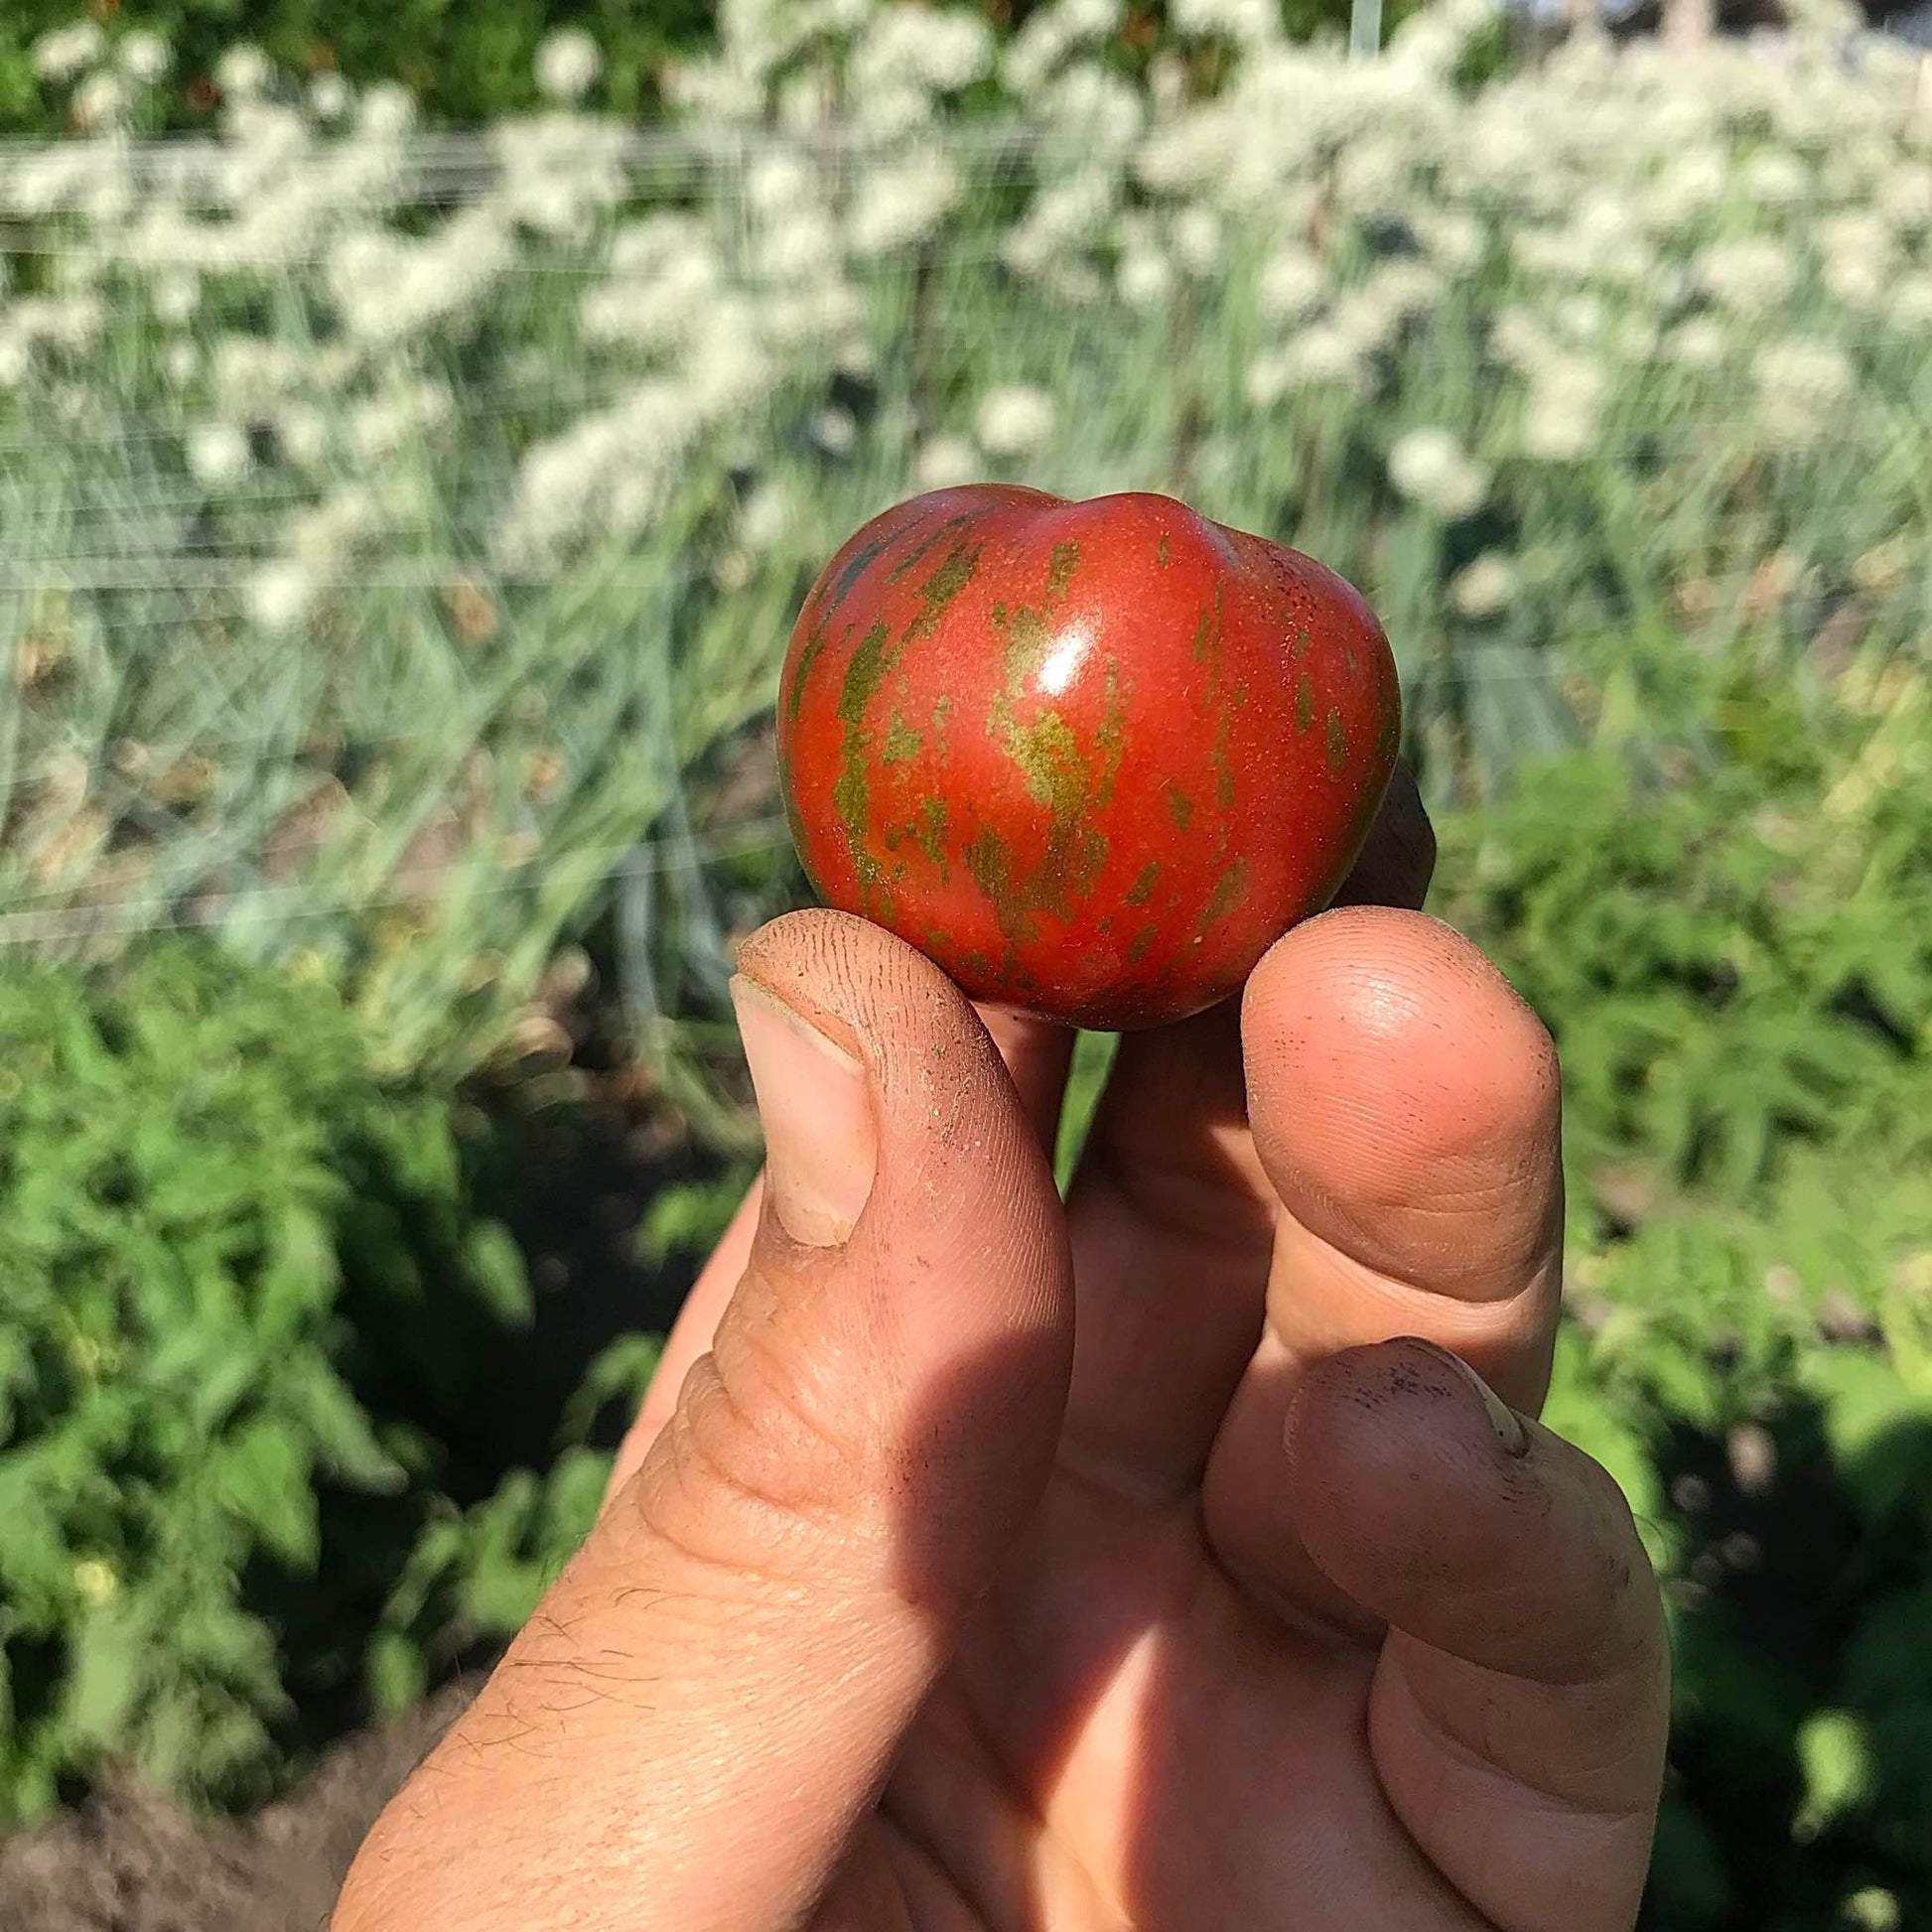 Small red tomato with metallic green stripes held up in front of an onion seed crop.